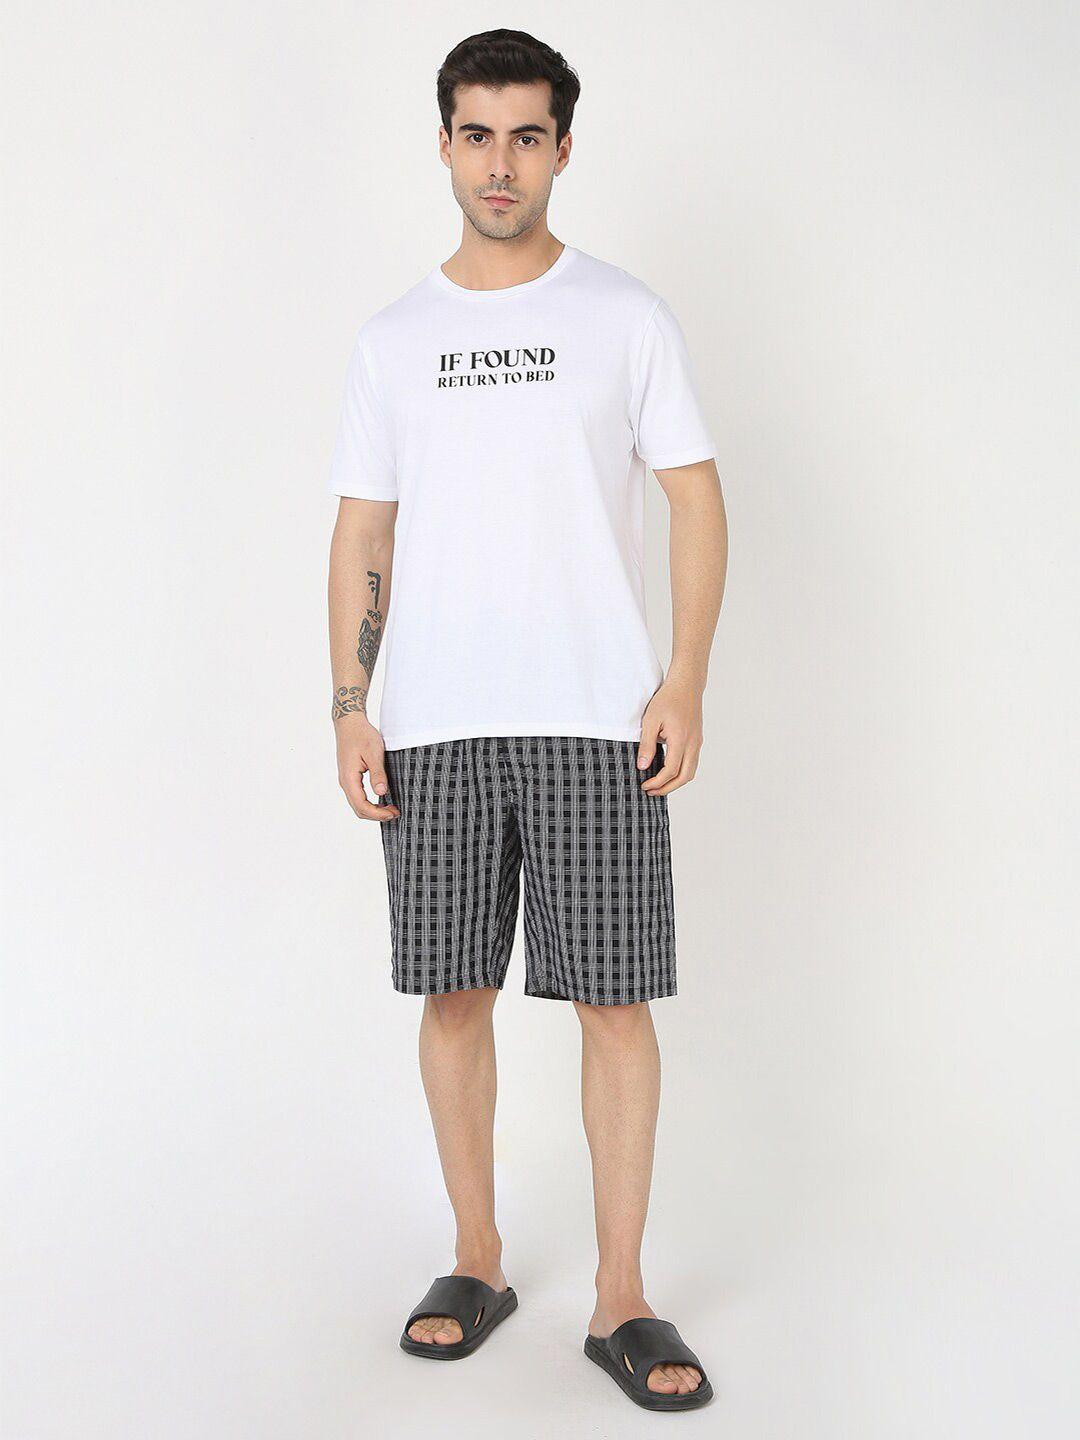 r&b typography printed pure cotton t-shirt & checked shorts